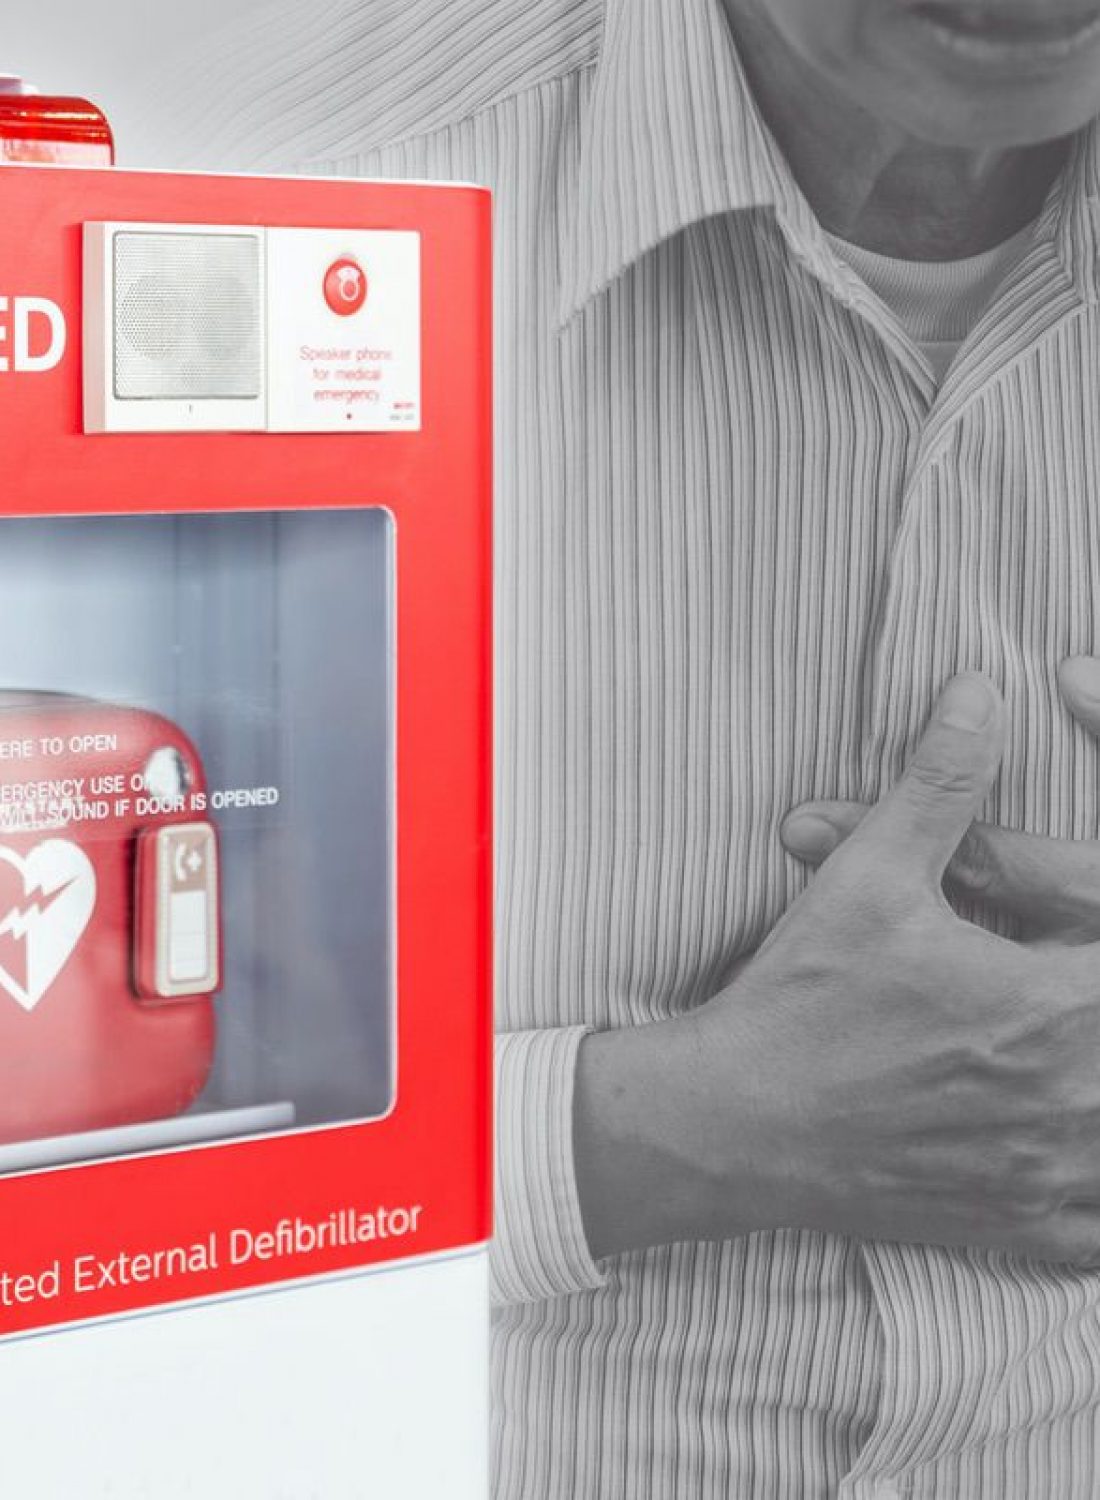 AED or Automated External Defibrillator first aid device for help people stroke or heart attack in public space